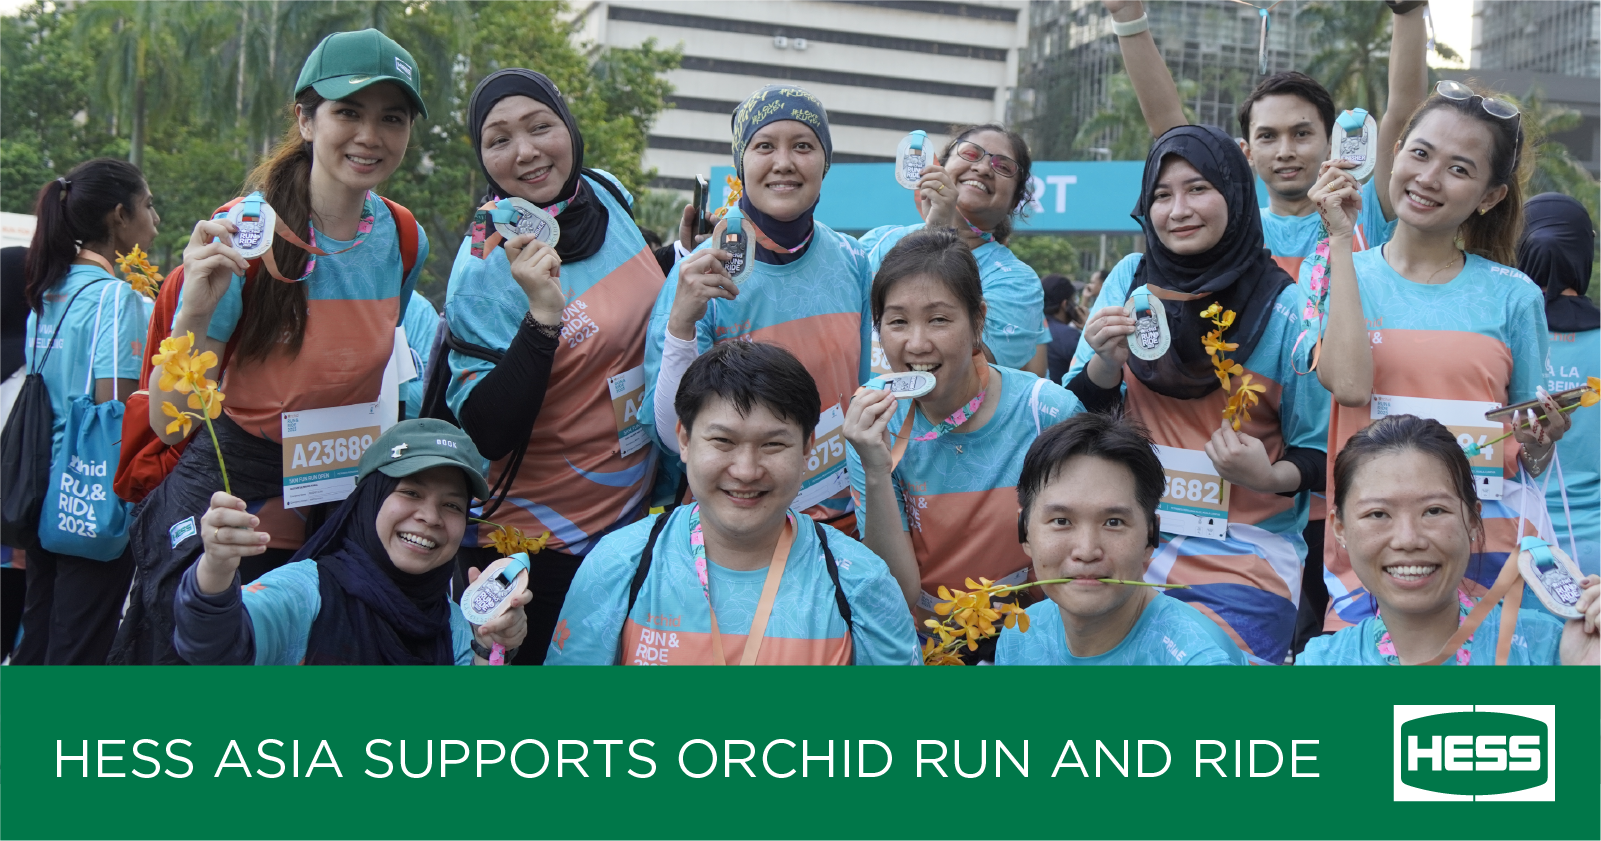 Hess Asia Supports Orchid Run and Ride